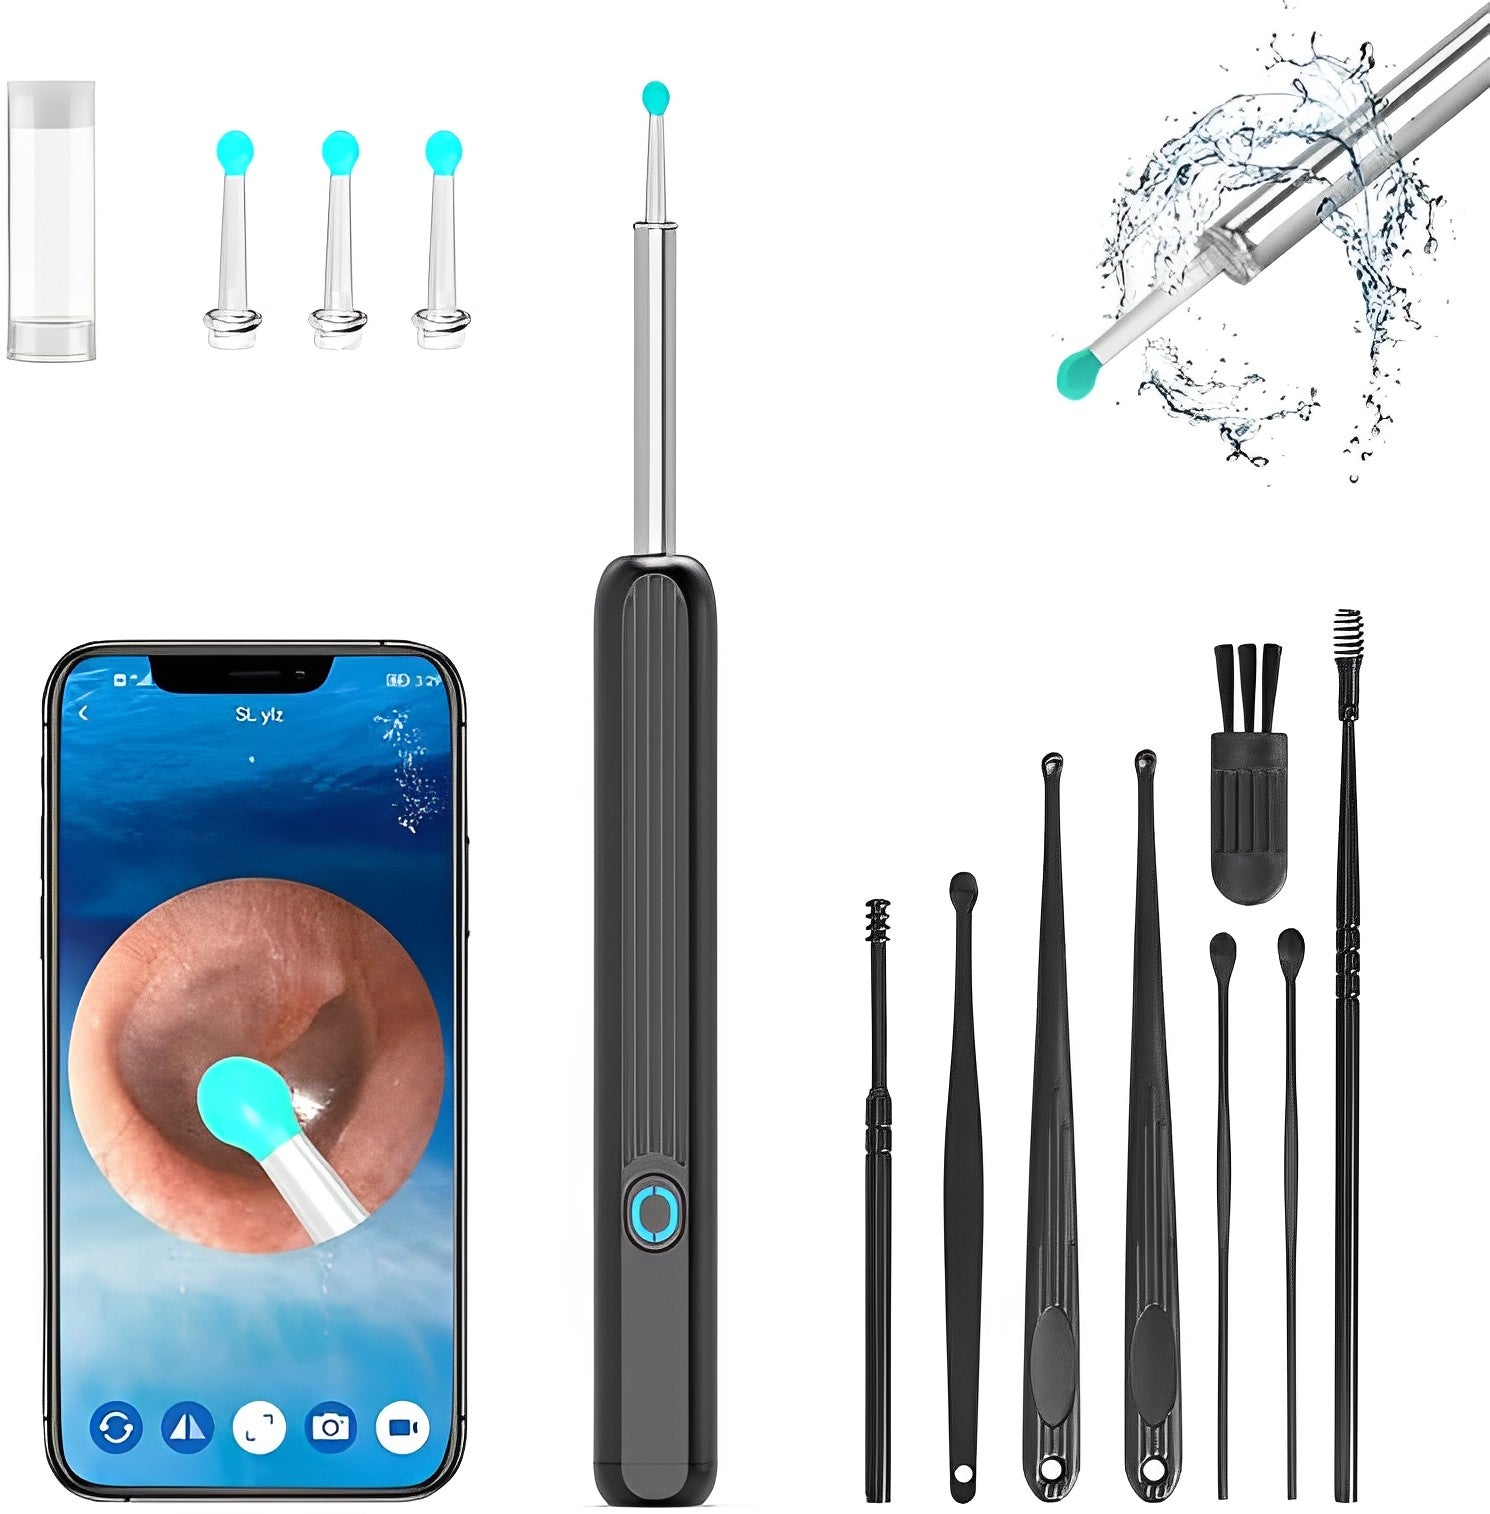 EarBit 3000 - Ear Cleaning Tool With a Camera